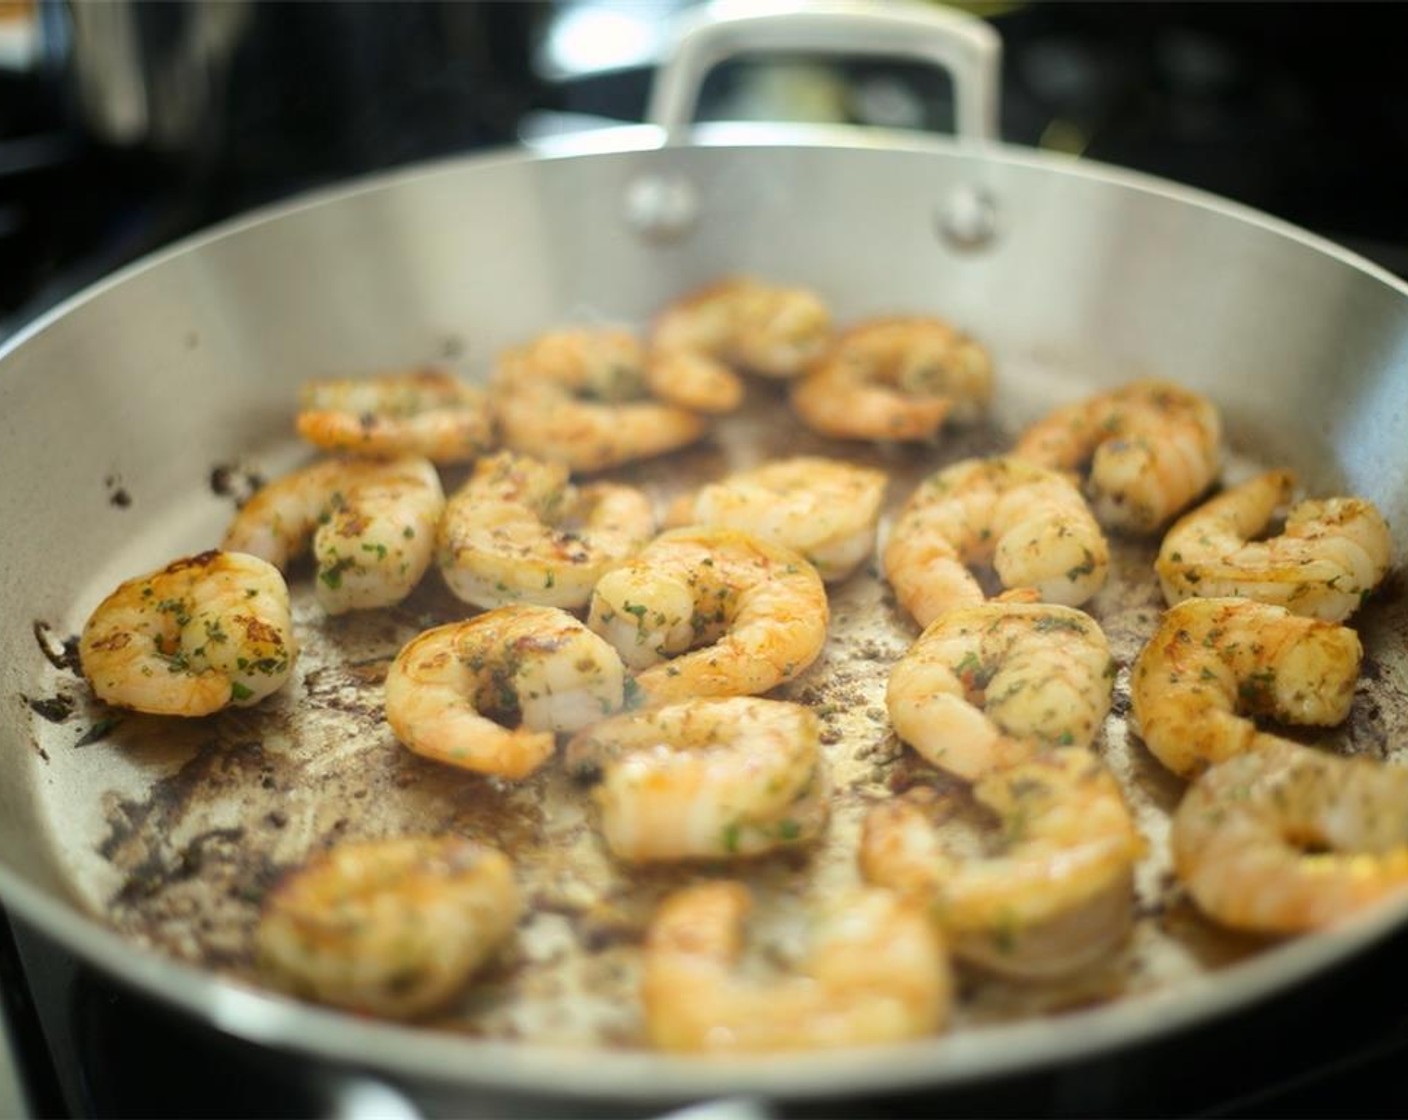 step 16 Once oil is hot, using tongs, carefully add the shrimp to the pan in a single layer. Cook one minute on both sides, and remove shrimp.